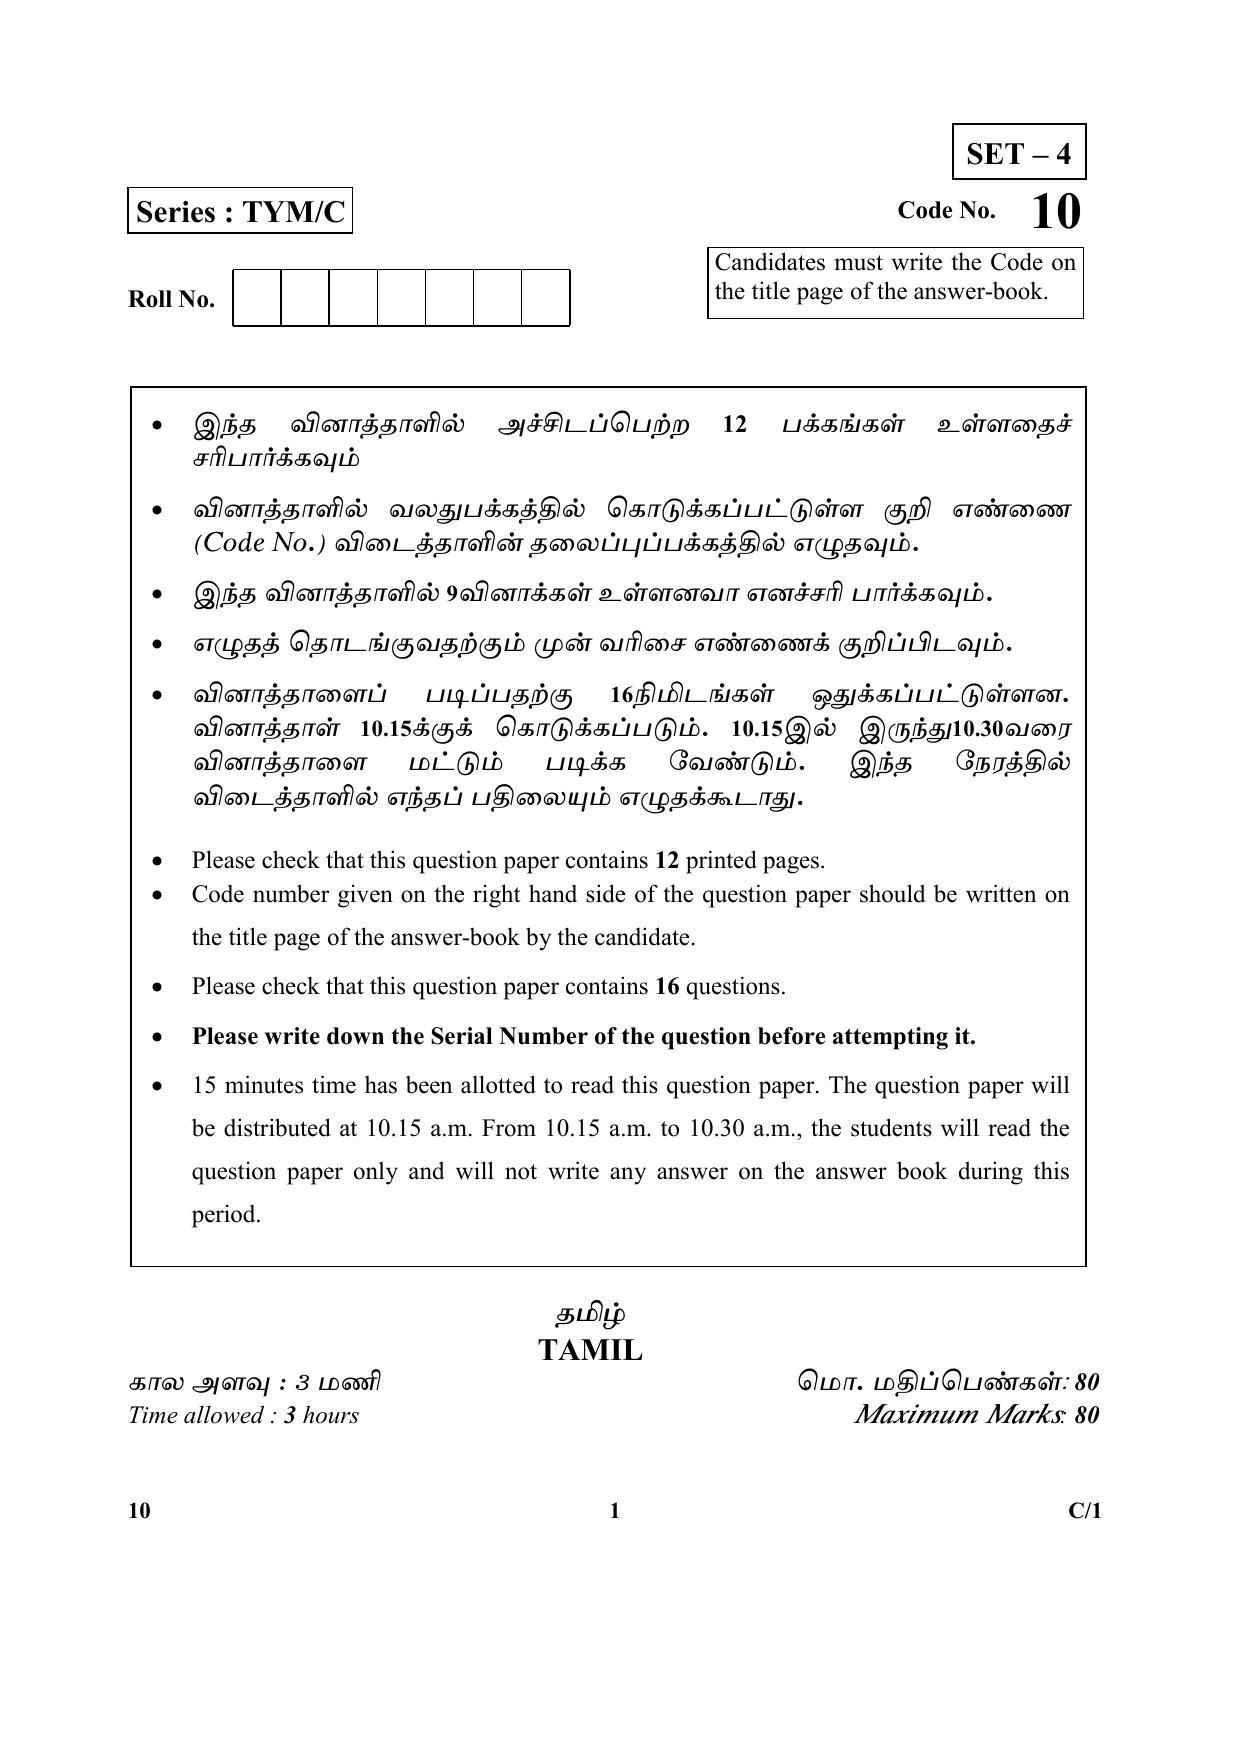 CBSE Class 10 10 (Tamil) 2018 Compartment Question Paper - Page 1